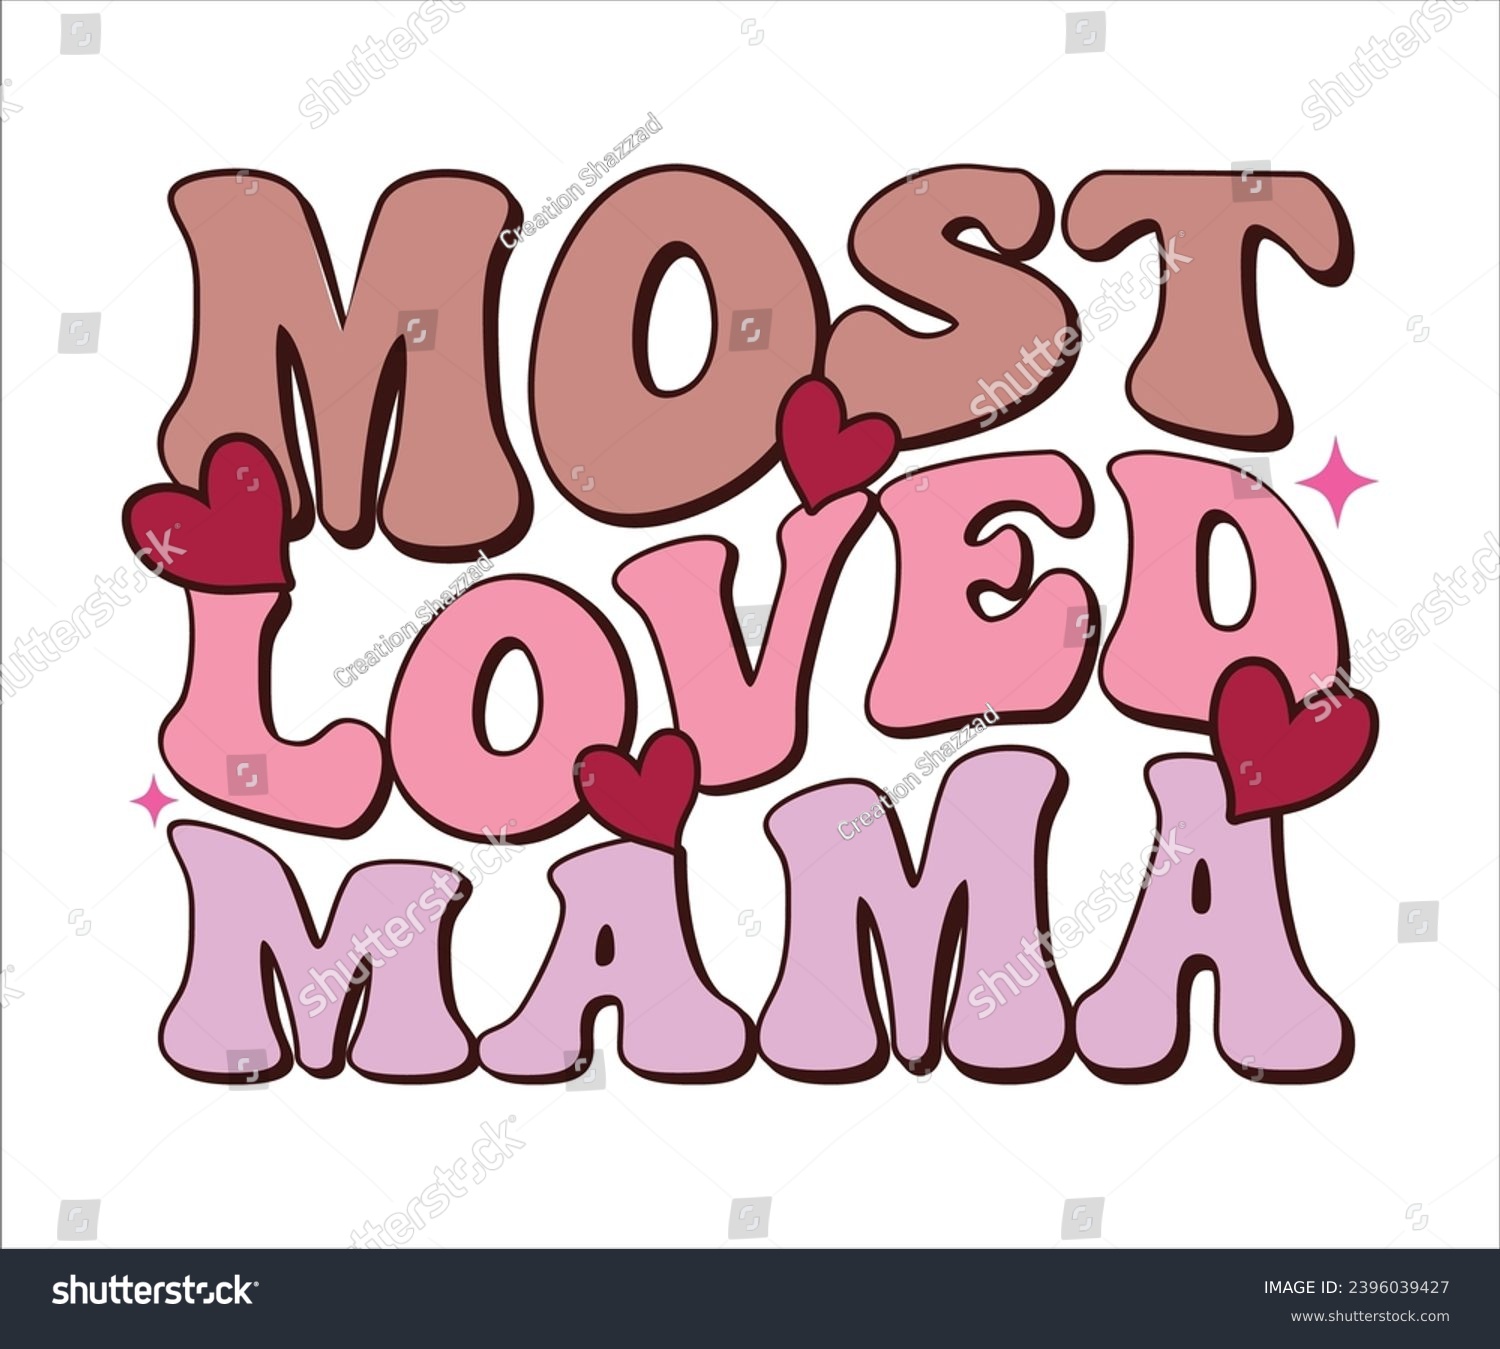 SVG of Most Loved Mama Retro T-shirt, Funny Mom Shirt, Mama Wavy Text, Mothers Day T-shirt, Mama Quotes, Retro Mom Shirt, New Mom Gift, Birthday Gift, Cut File For Cricut And Silhouette svg